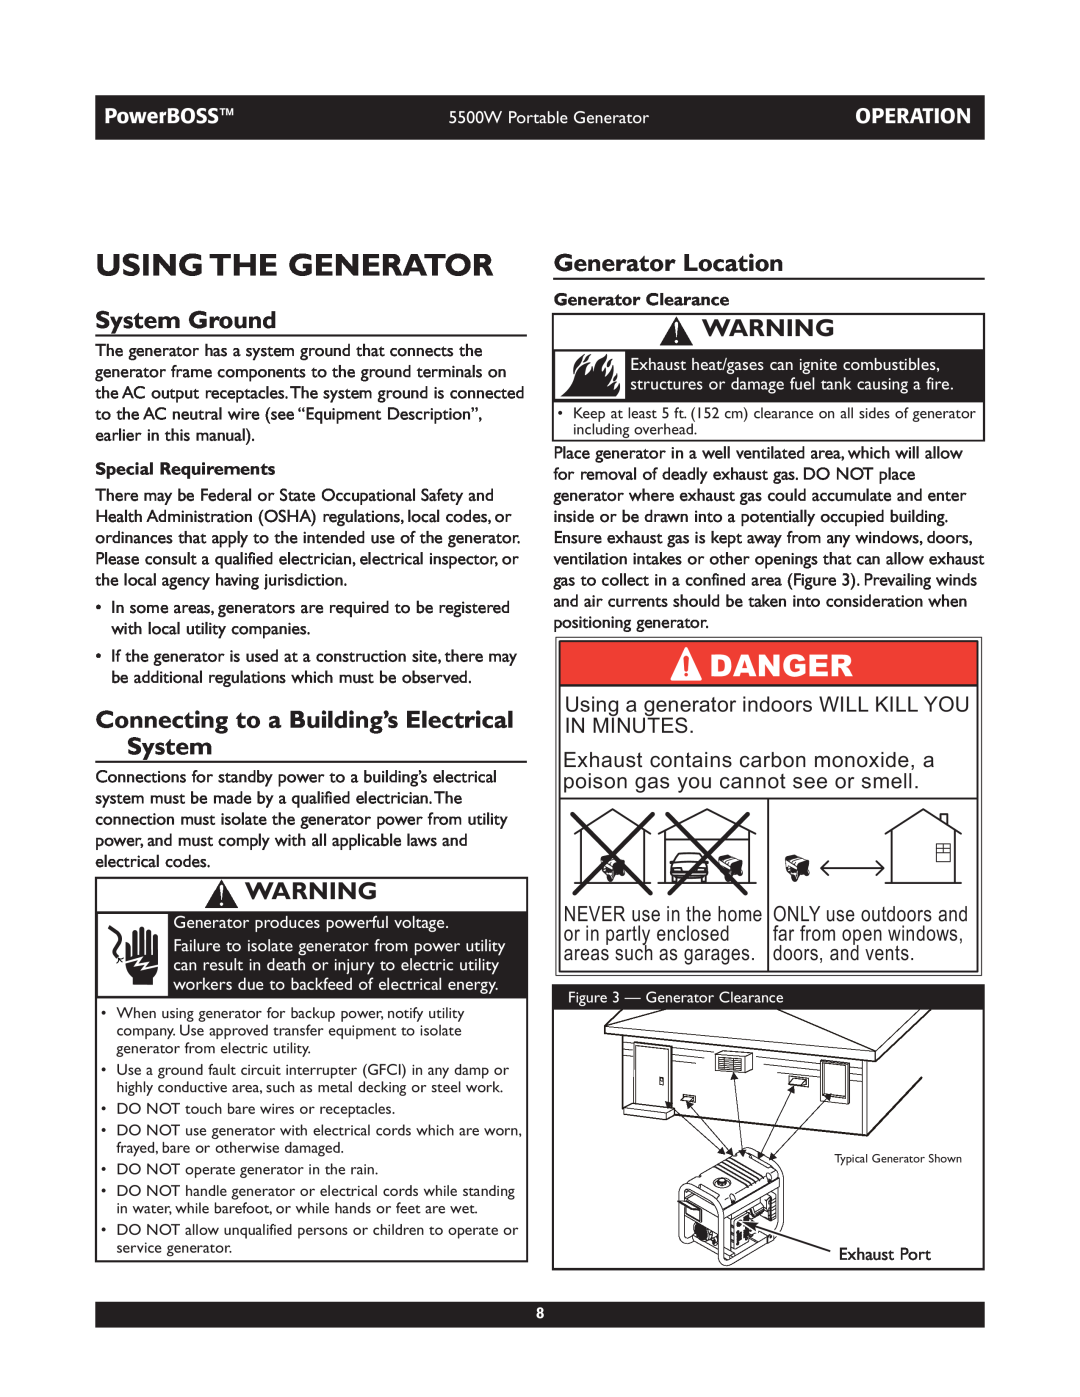 Briggs & Stratton 030249 manual Using The Generator, System Ground, Connecting to a Building’s Electrical System, Operation 